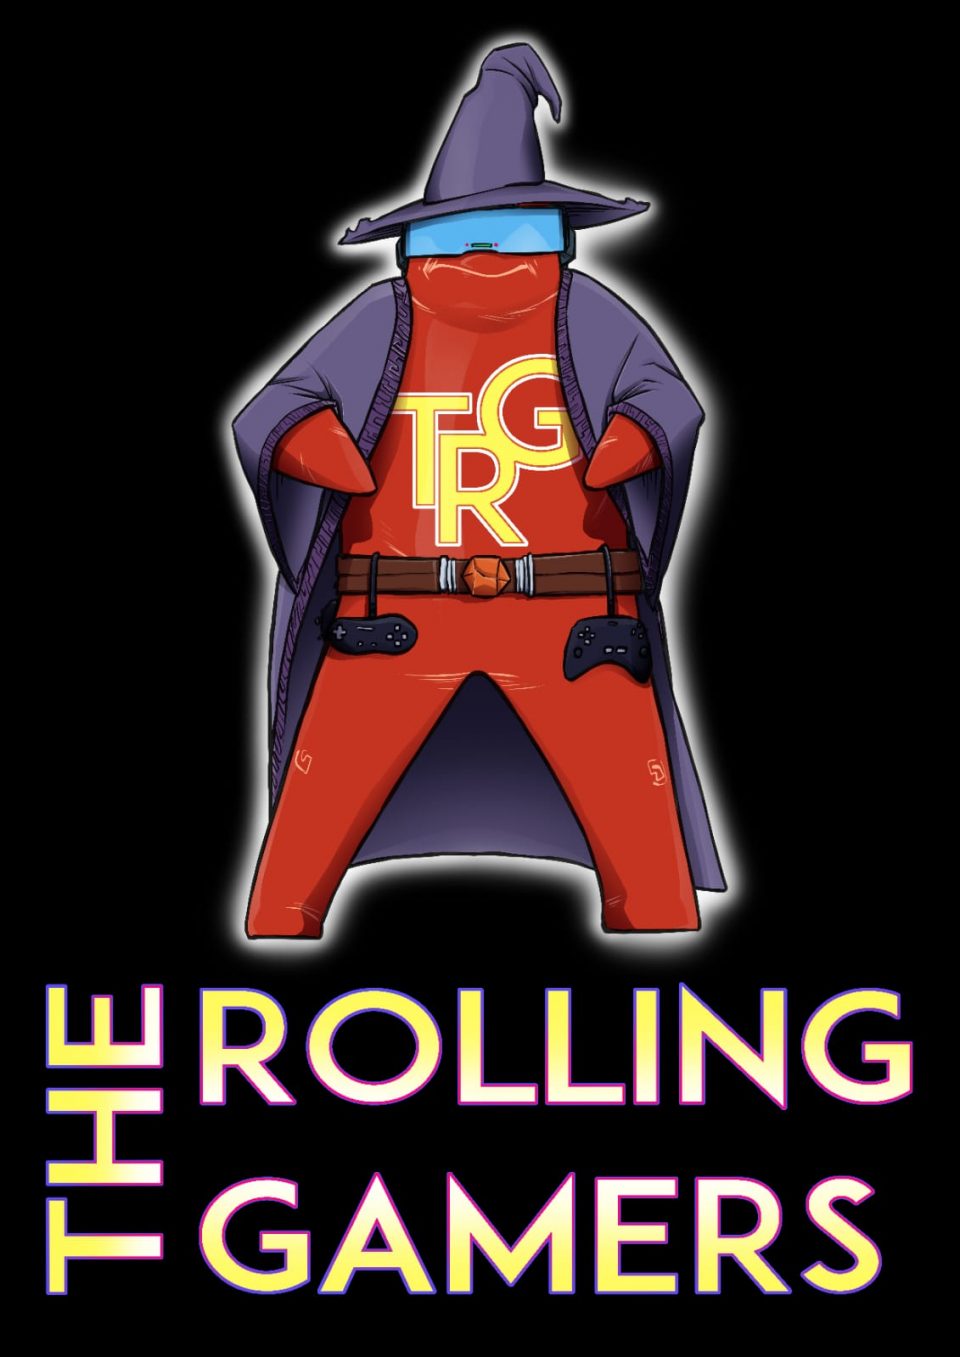 The Rolling Gamers